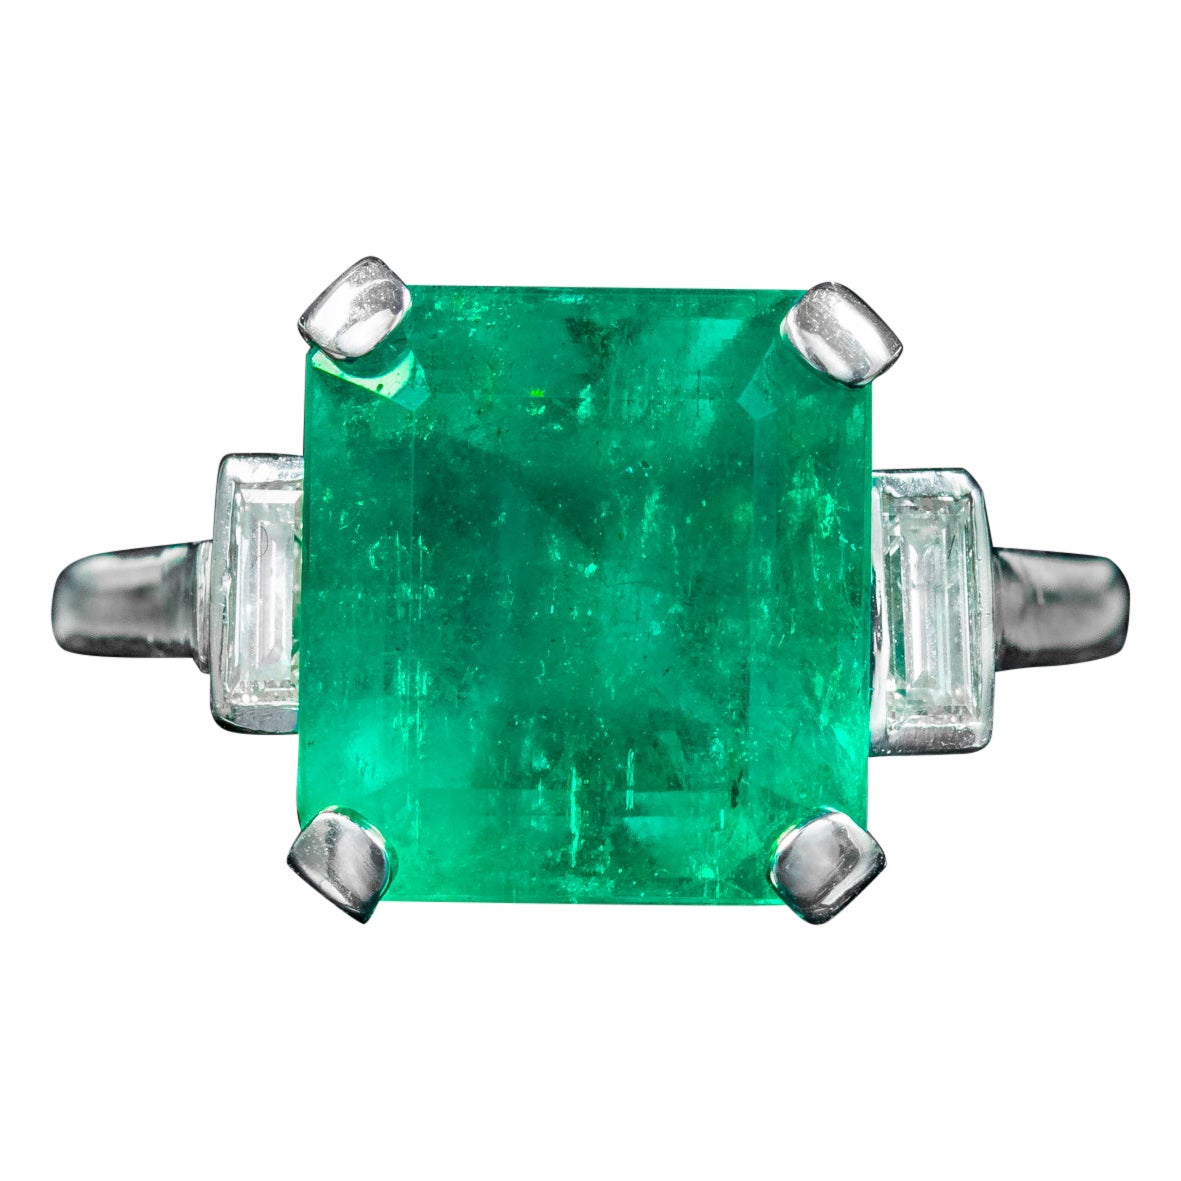 Art Deco Emerald Diamond Trilogy Ring 7.24ct Colombian Emerald With Cert